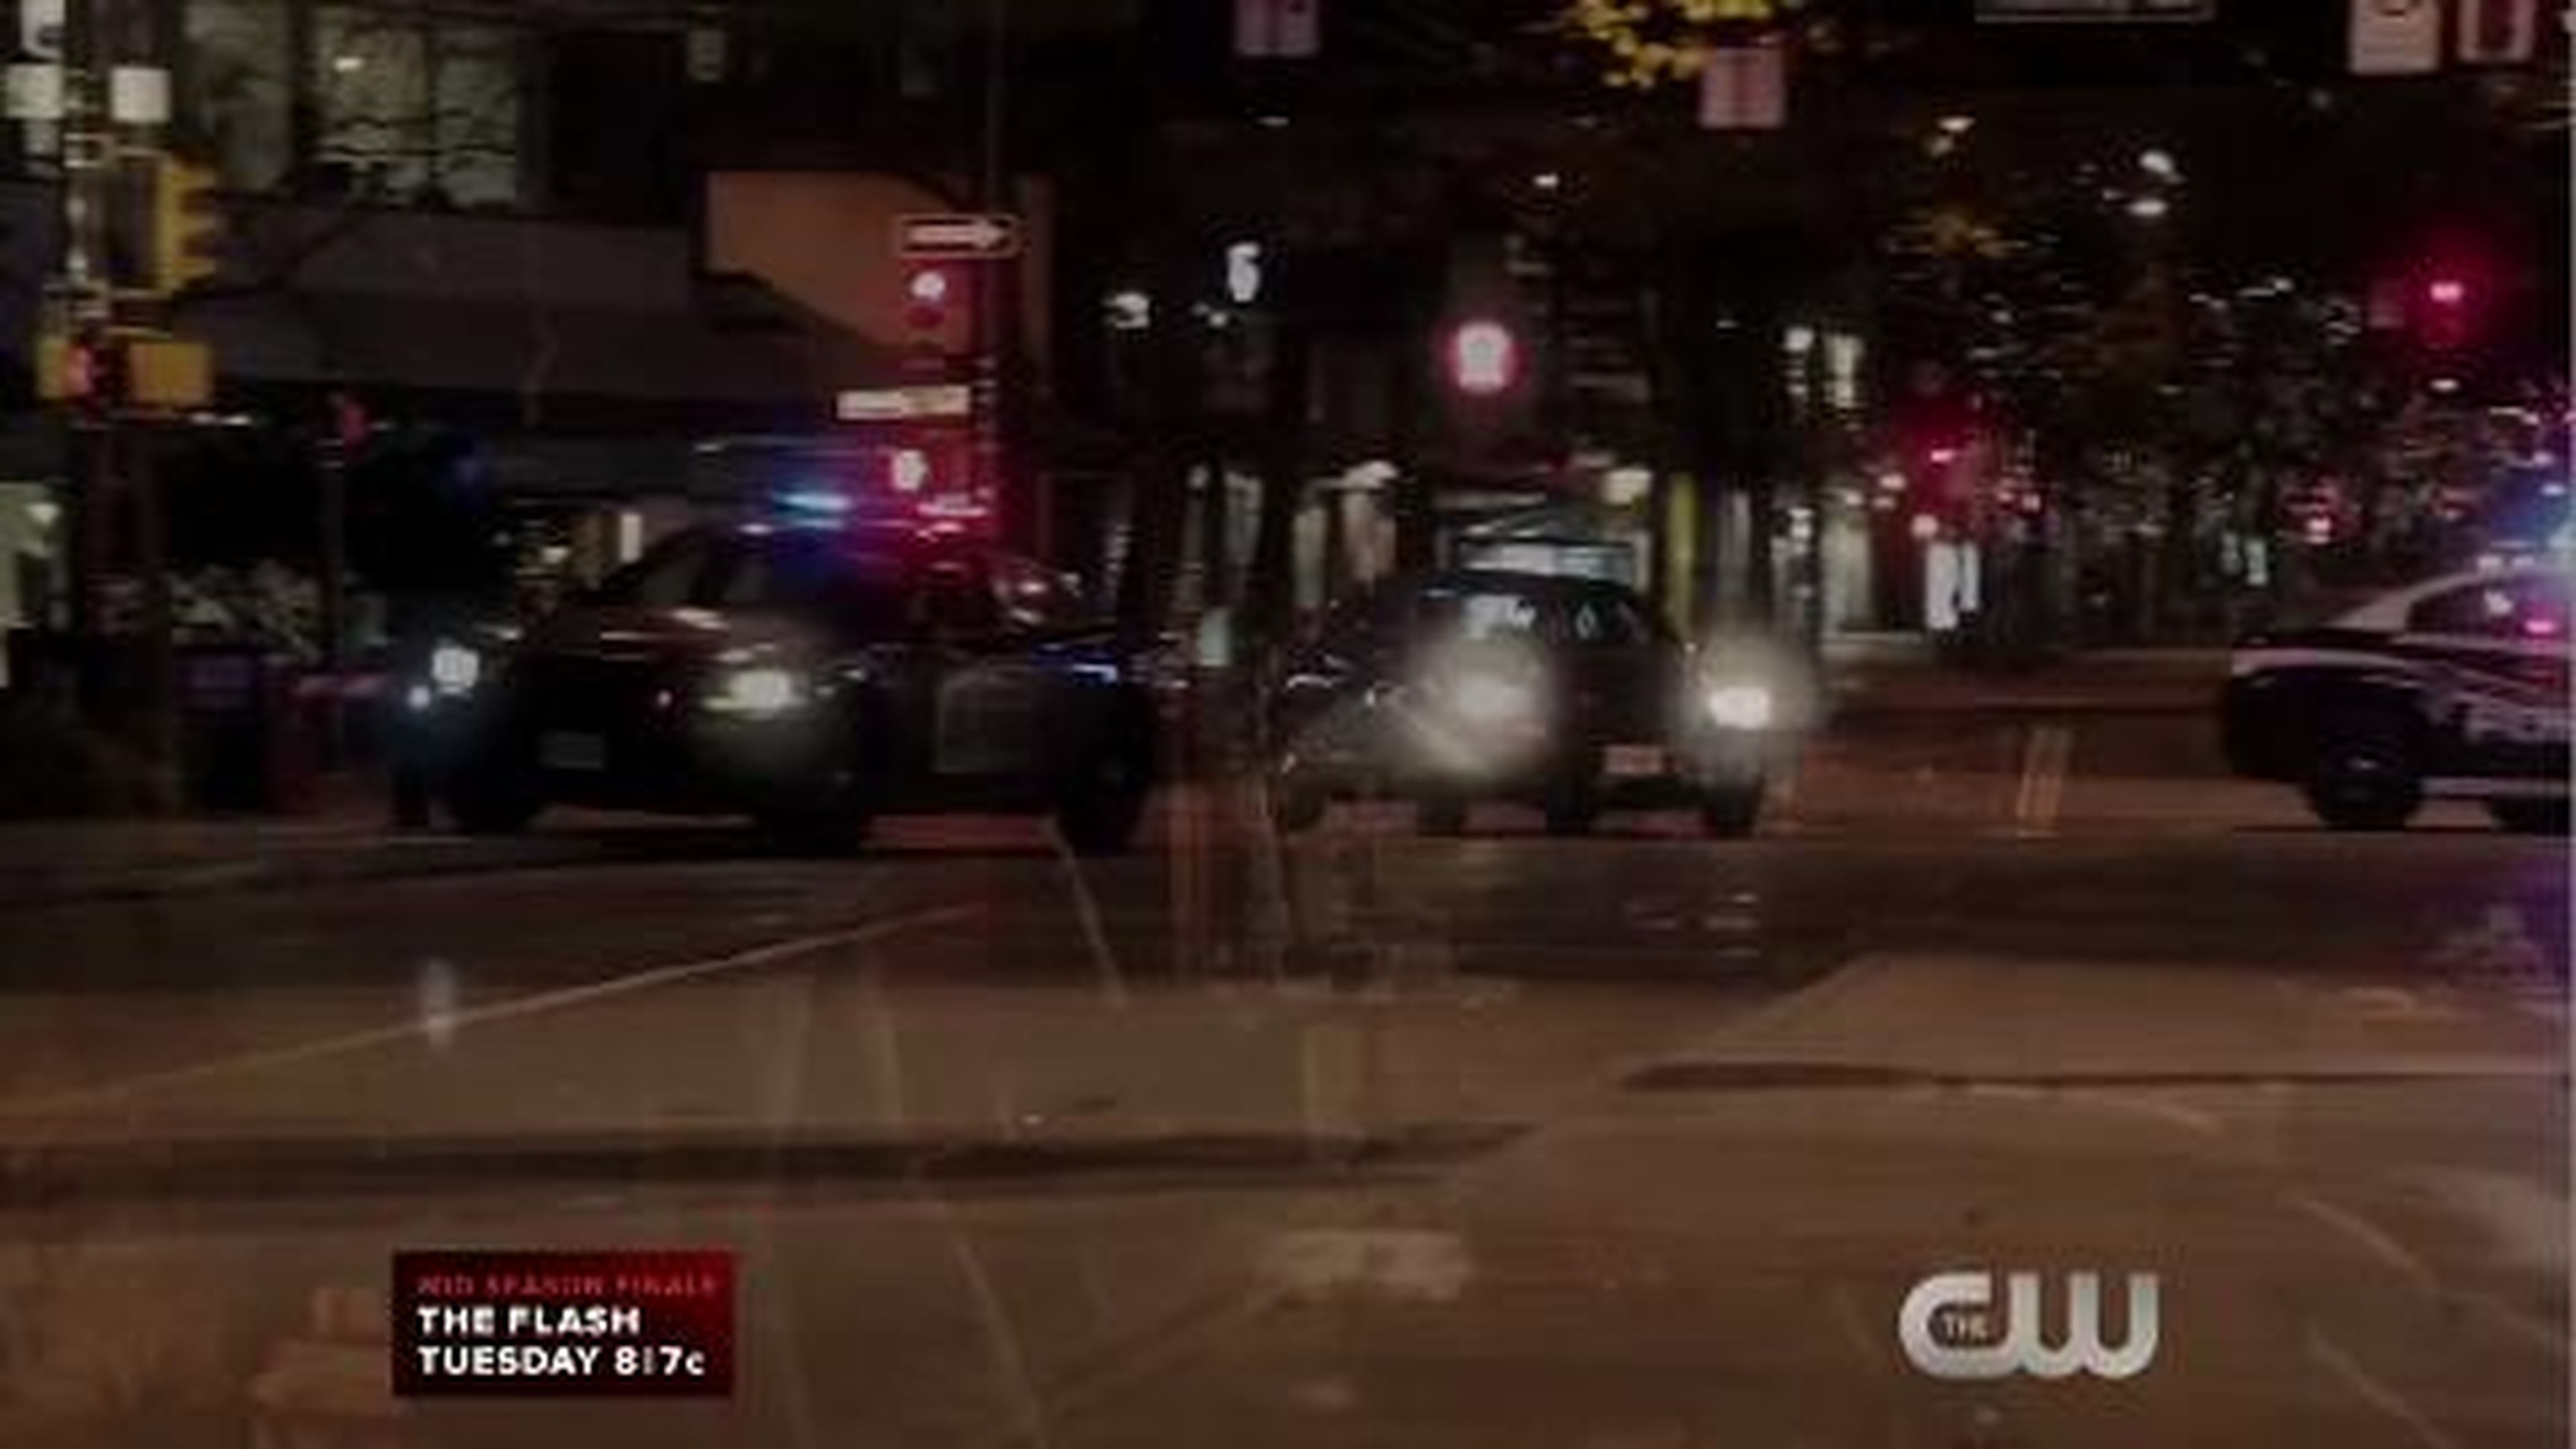 The Flash - Running To Stand Still Extended Trailer - The CW